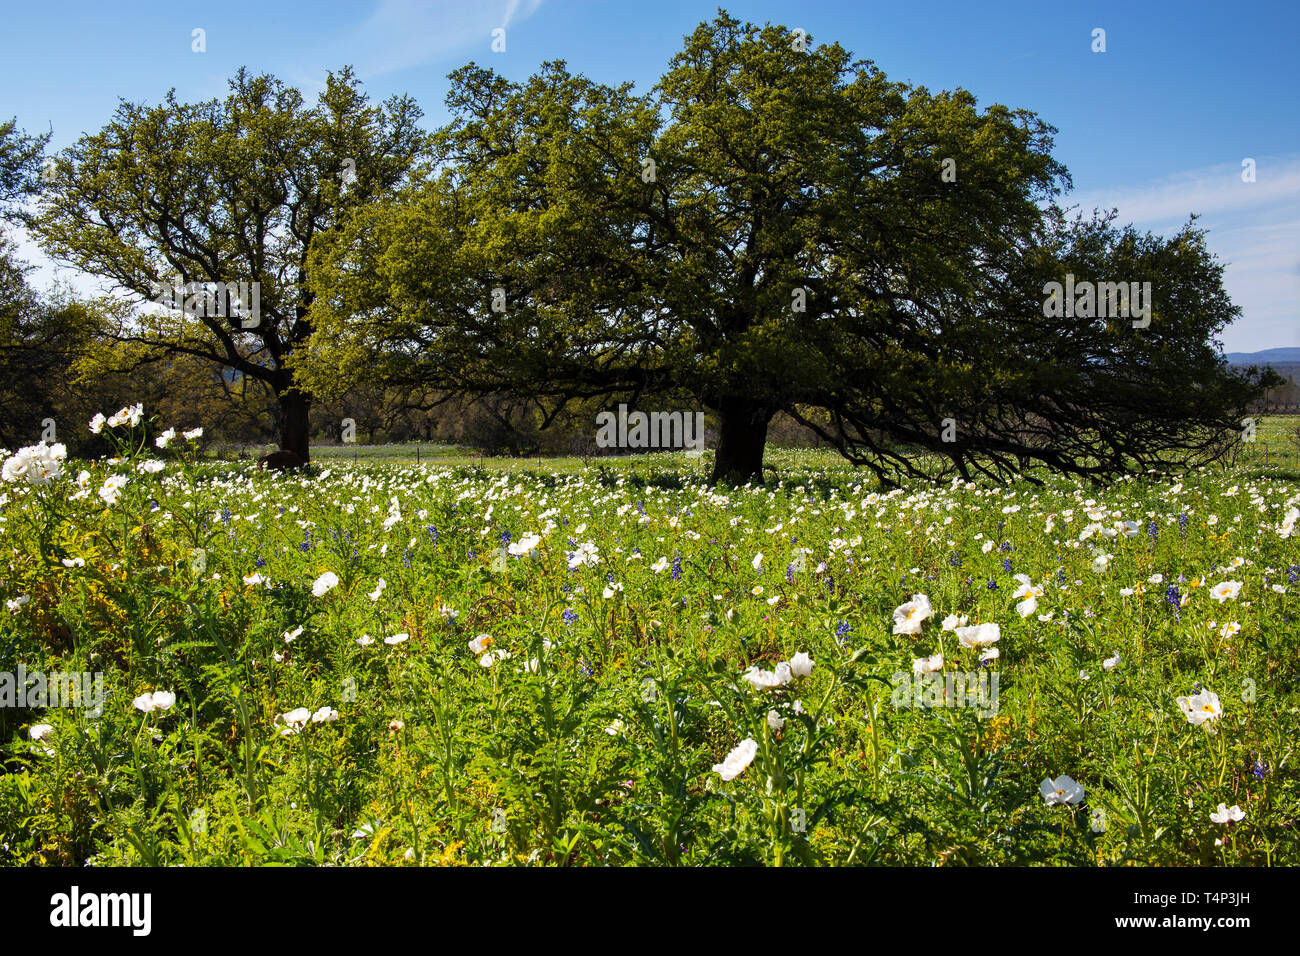 Field of Wild White Poppies on Willow City Loop, Texas Stock Photo